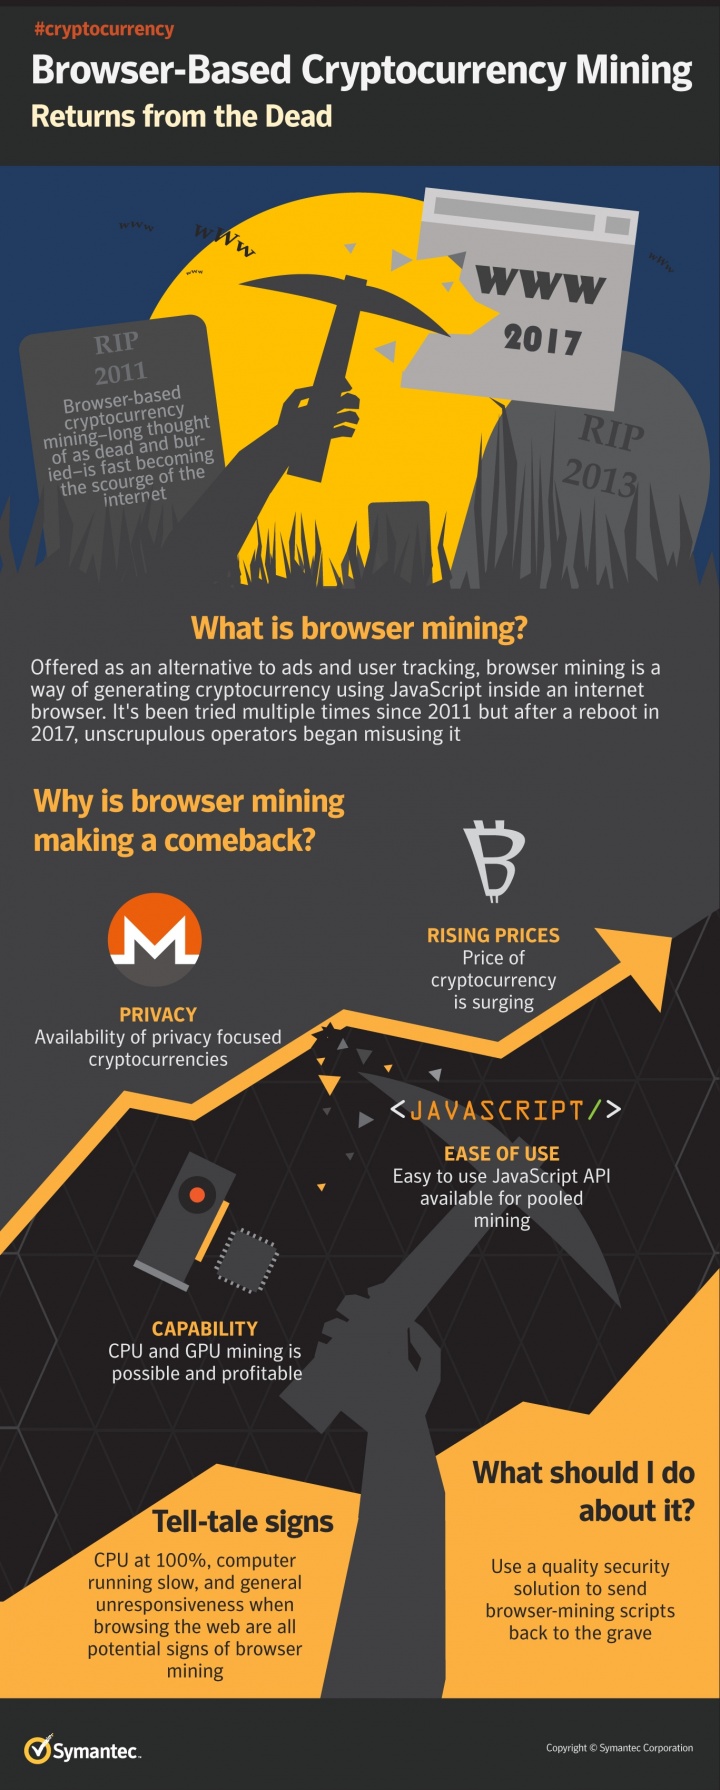 What is browser-based cryptocurrency mining, and how does it work?